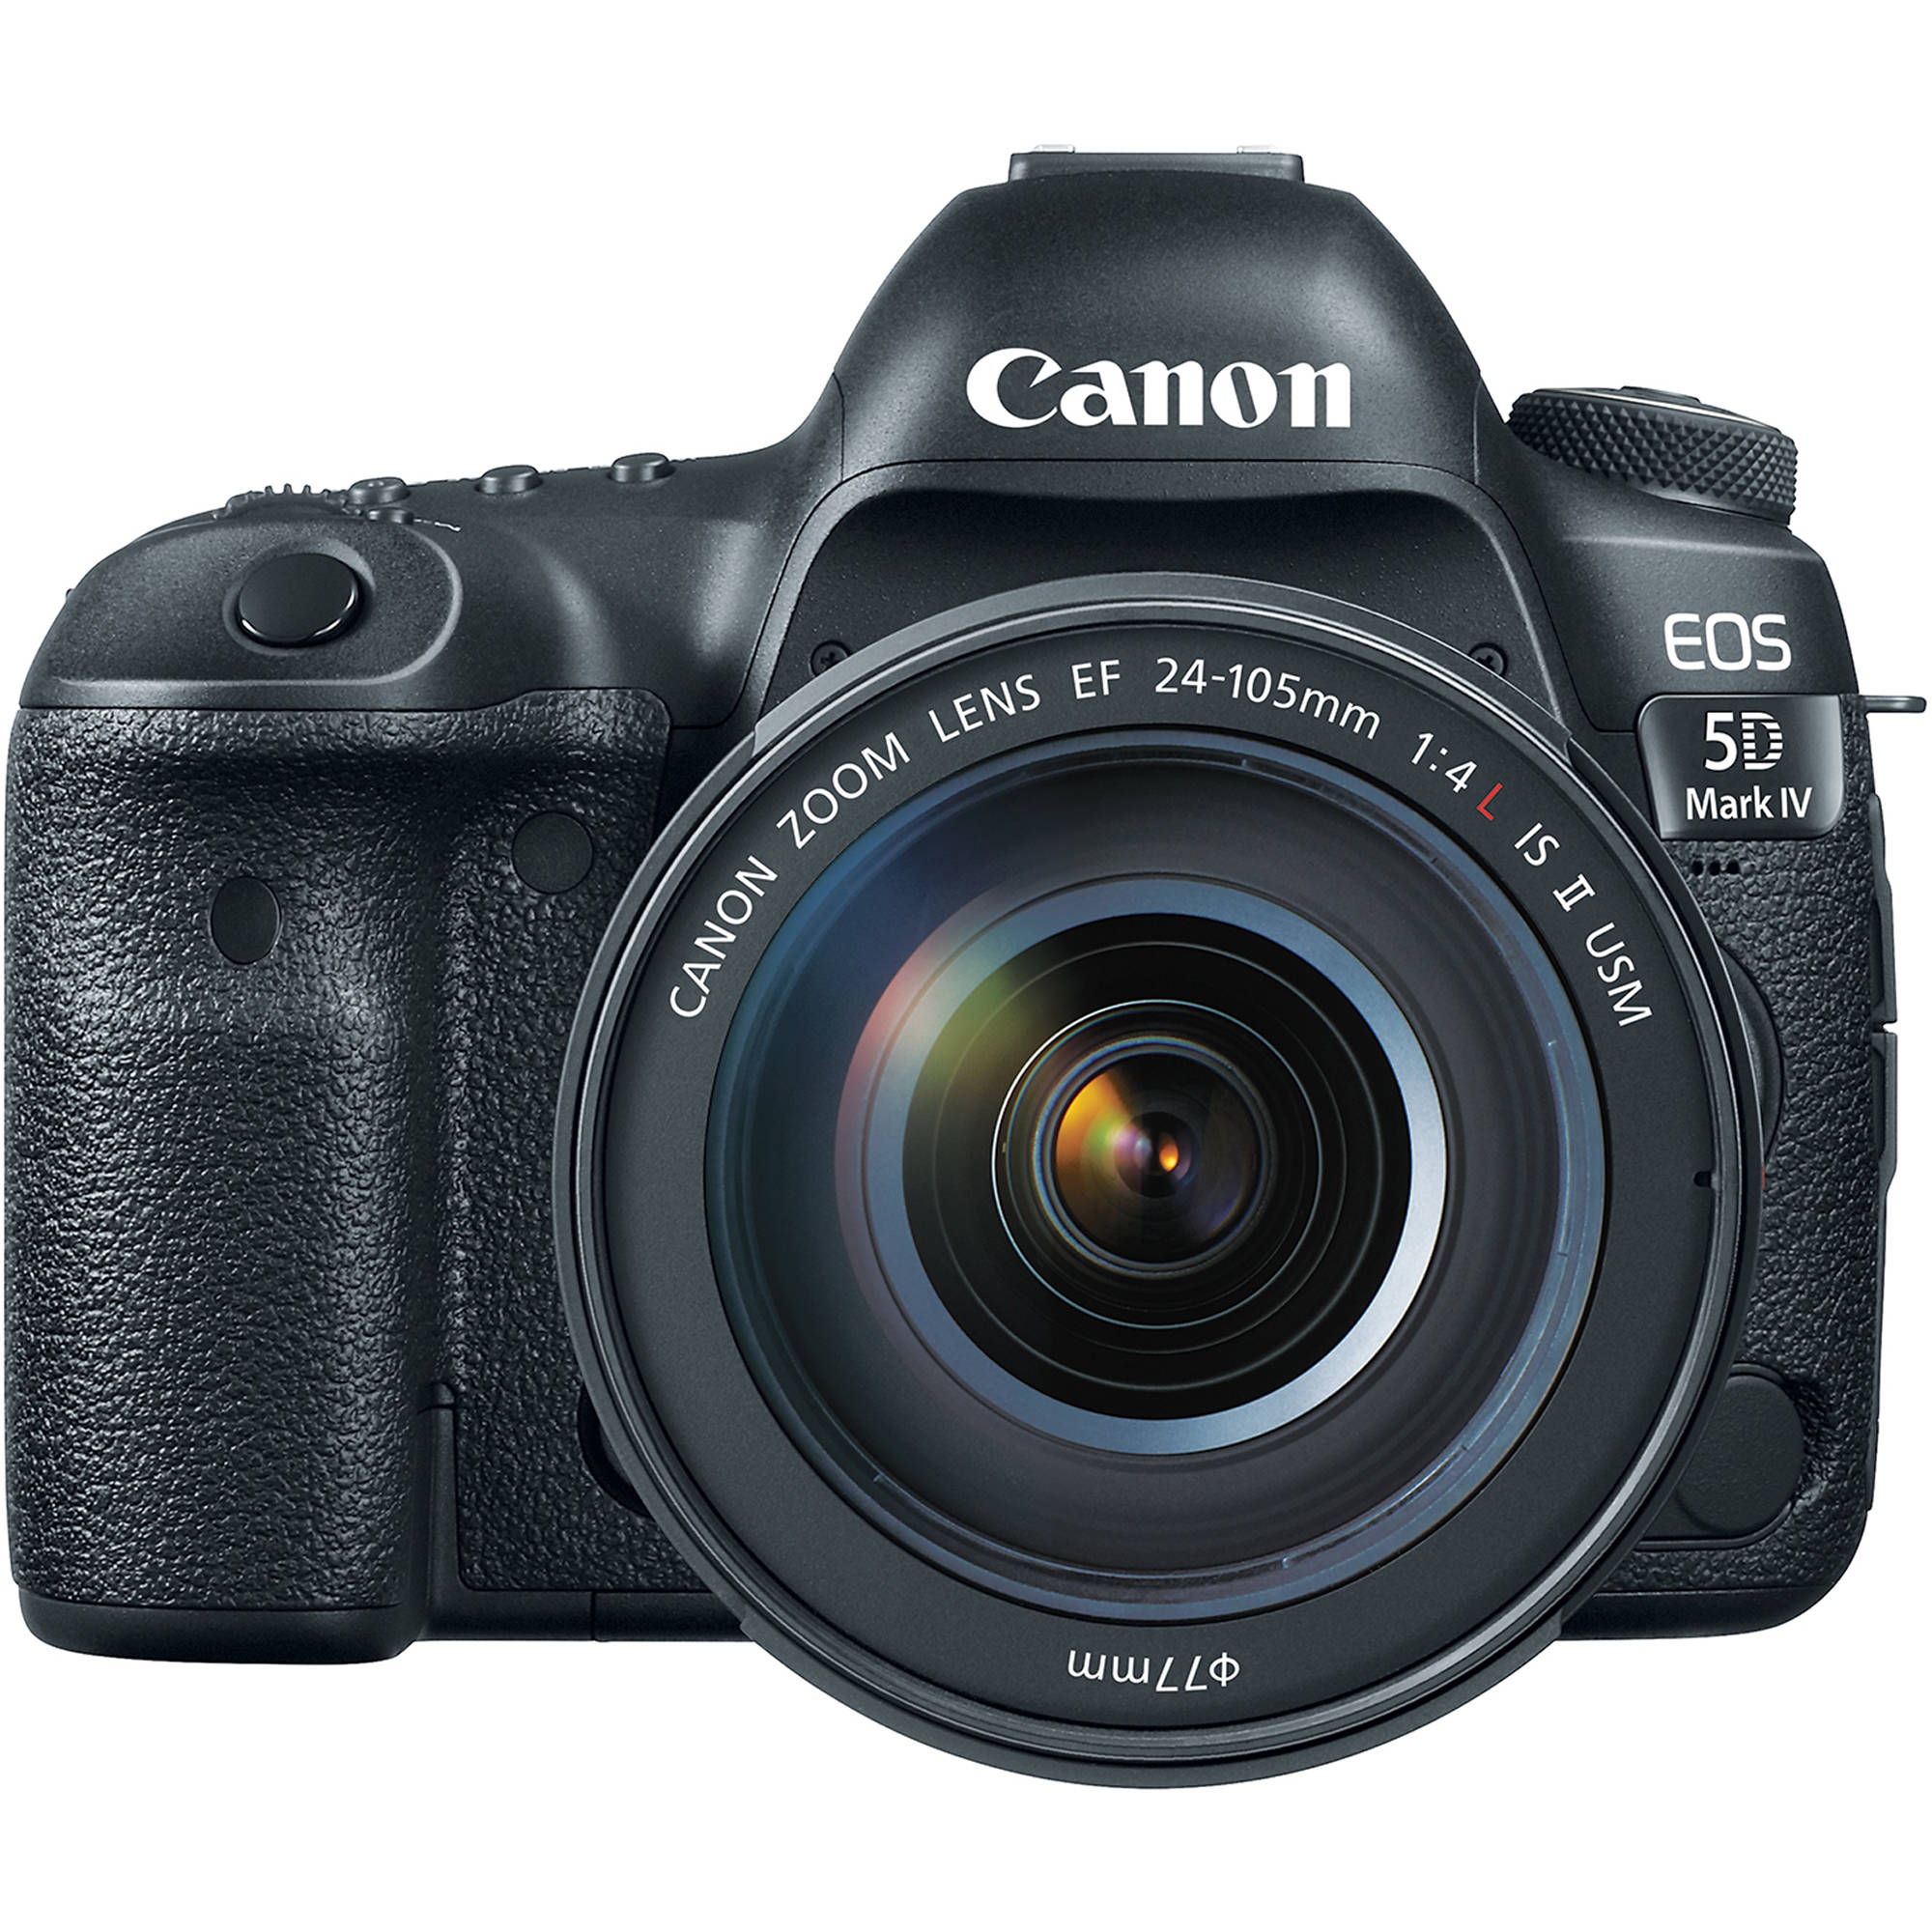 Canon EOS 5D Mark IV DSLR Camera with 24-105mm f/4L II Lens | K&M 